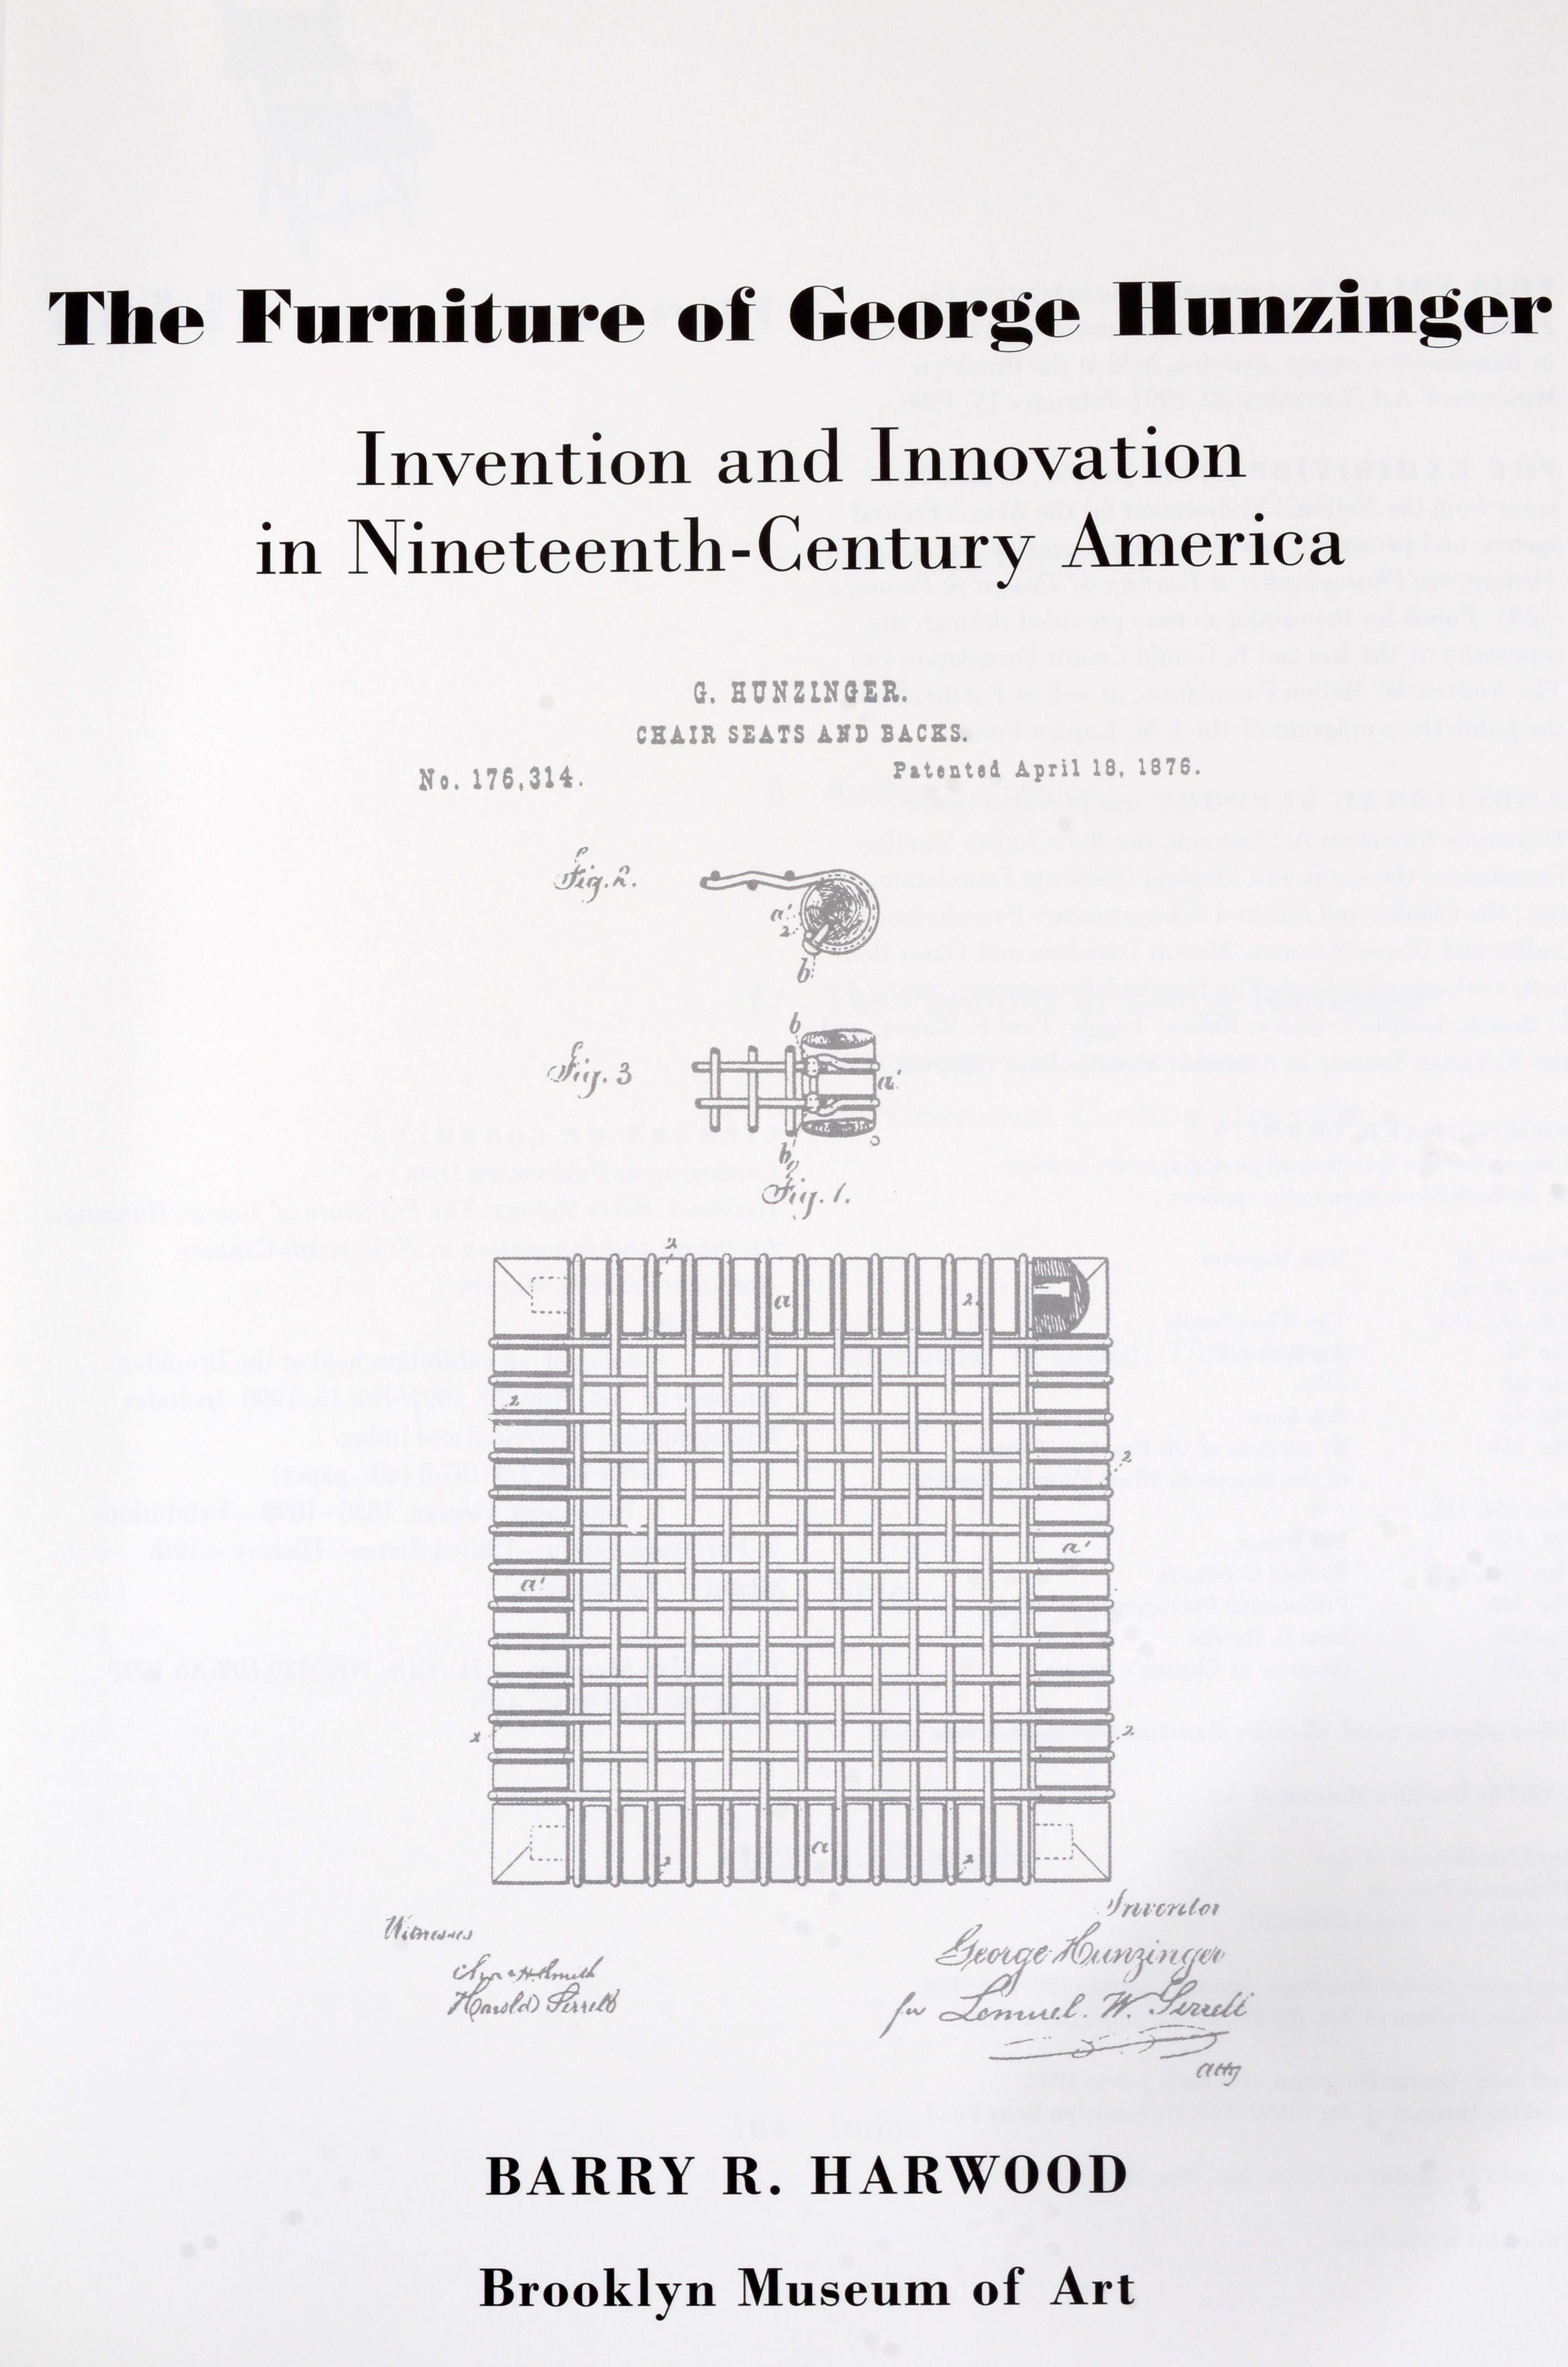 The Furniture of George Hunzinger: Invention and Innovation in Nineteenth-Century America, by Barry Robert Harwood. 1st Ed Softcover exhibition catalog. Published by Brooklyn Museum, Brooklyn, New York, 1997. This catalog was prepared to accompany